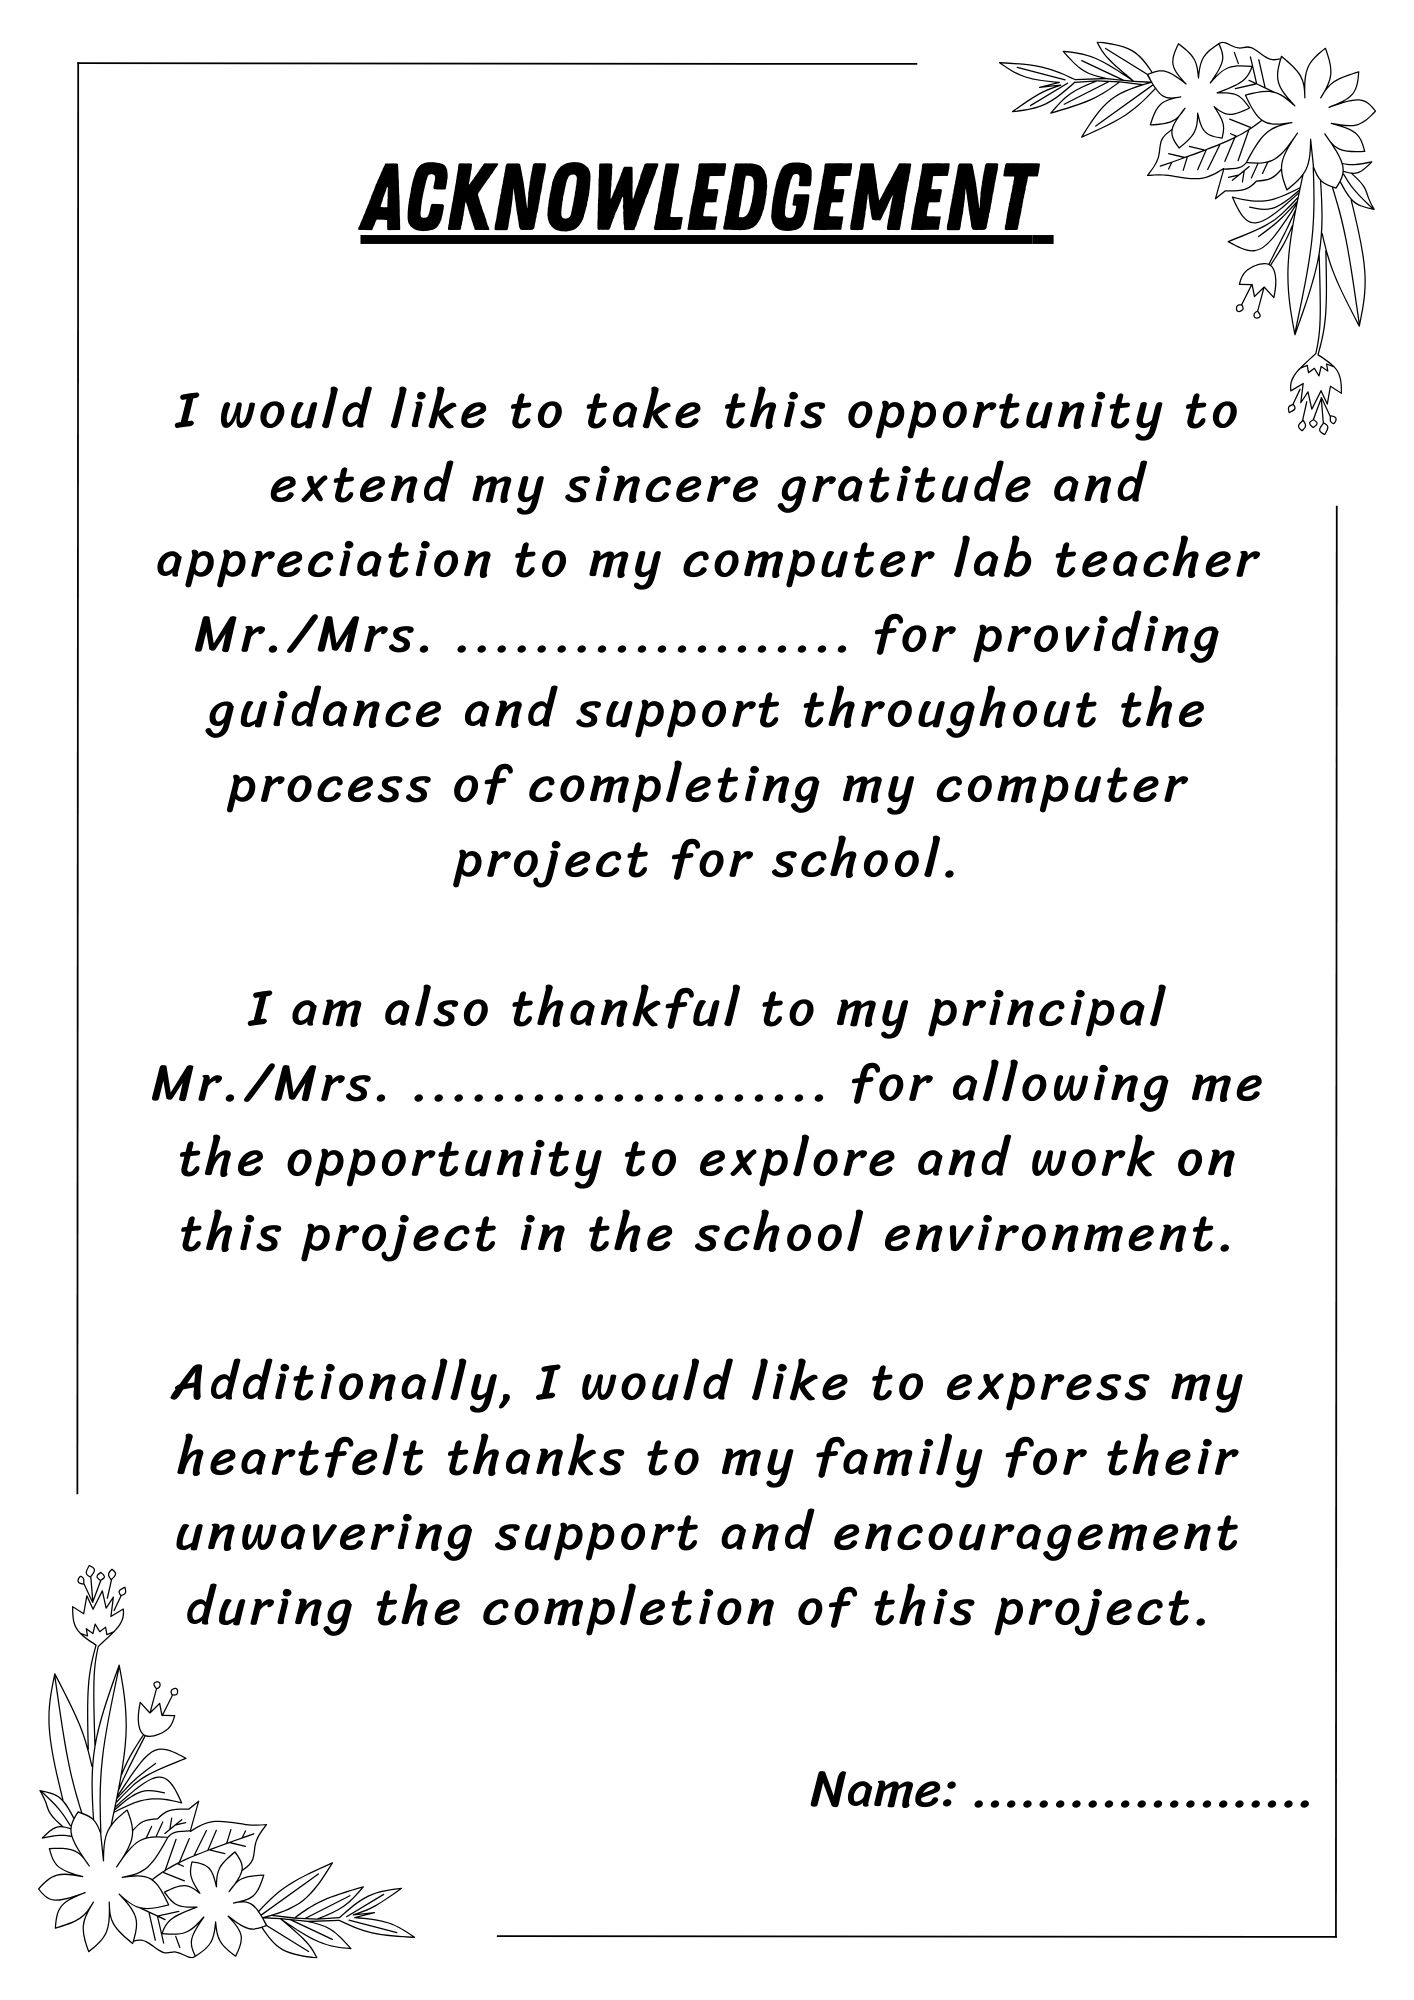 Computer Project Acknowledgement